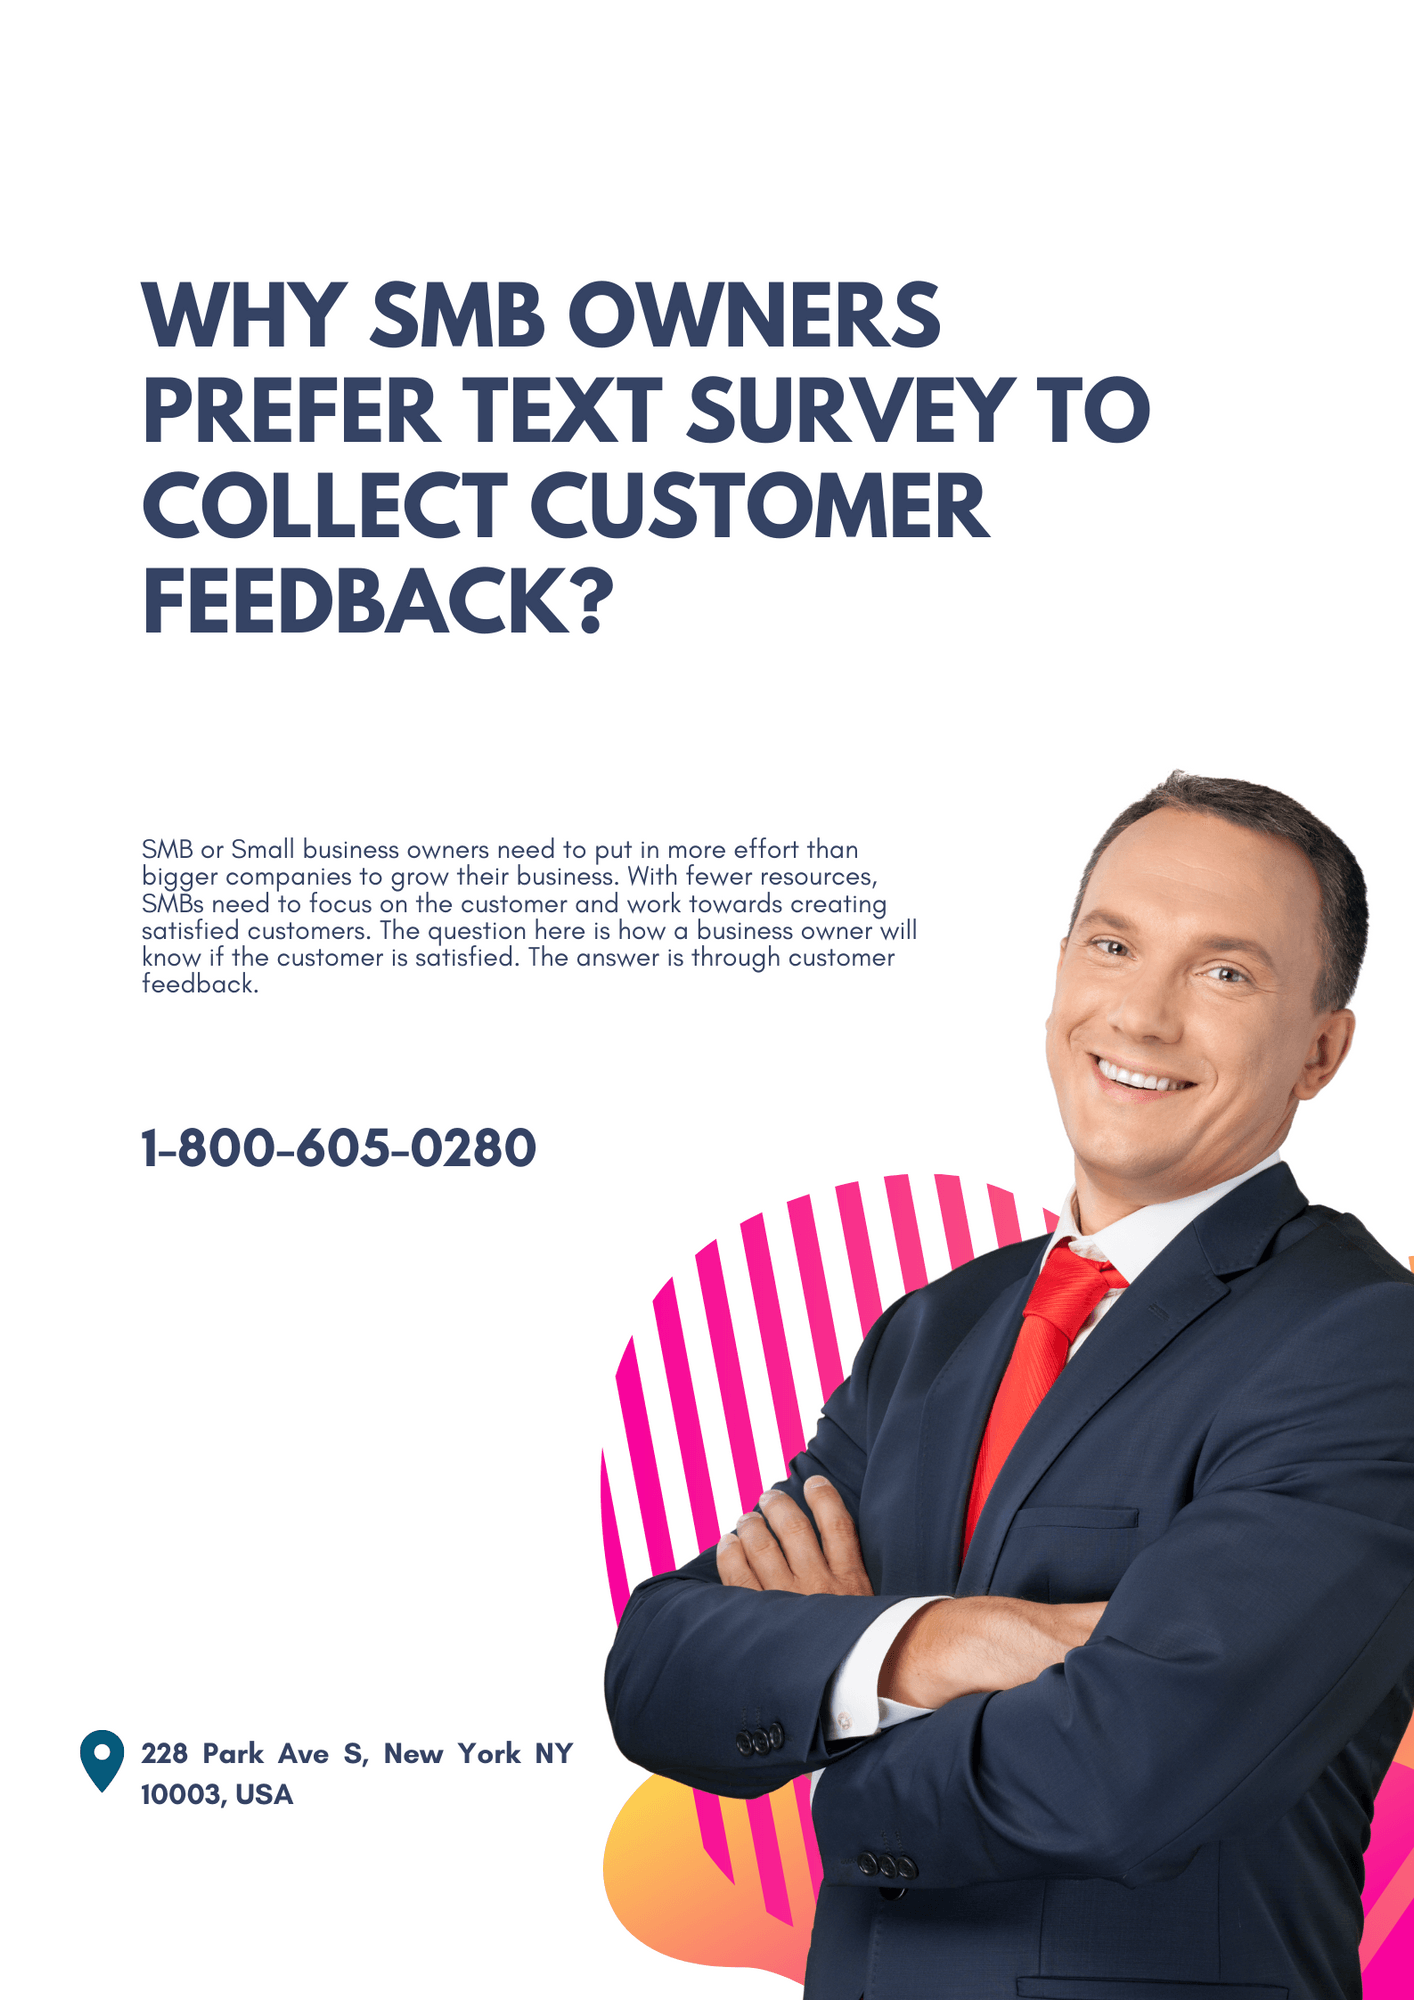 Why SMB Owners Prefer Text Survey To Collect Customer Feedback.png